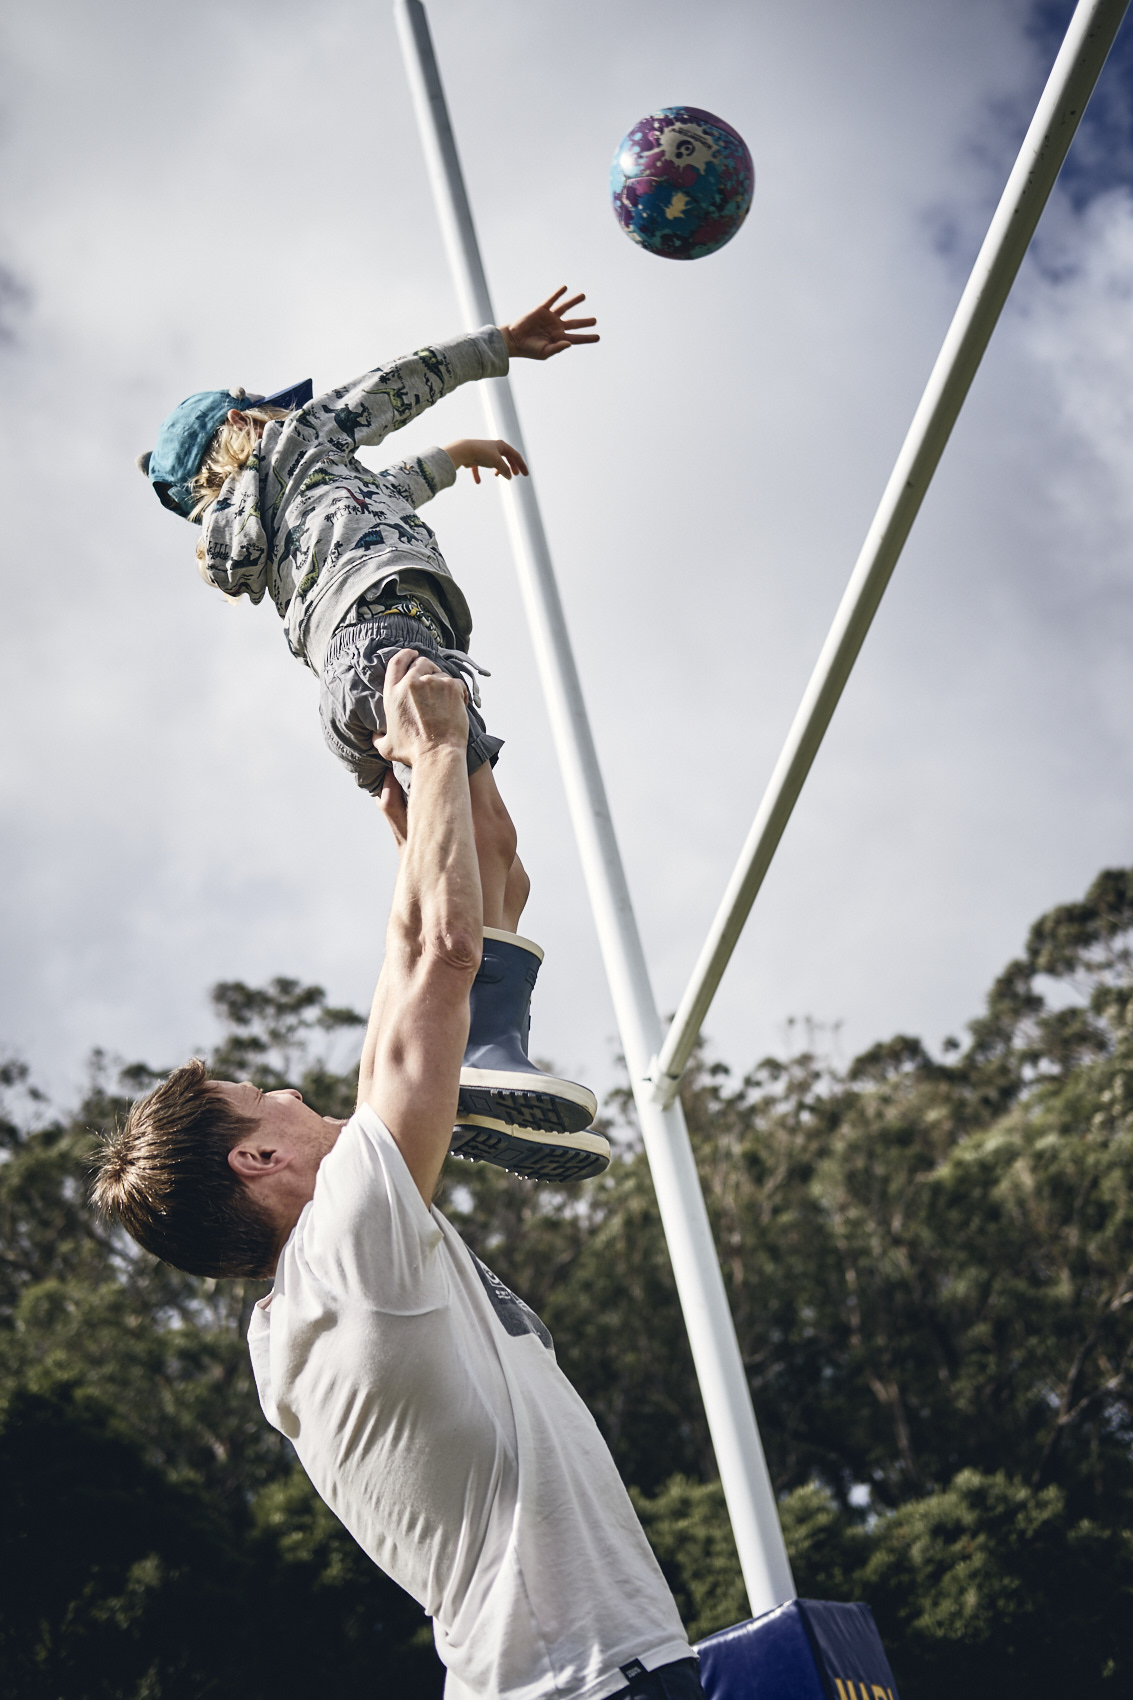 Lockdown • Young Boy Throwing Ball Over Rugby Post with Dad • Lifestyle & Portrait Photography